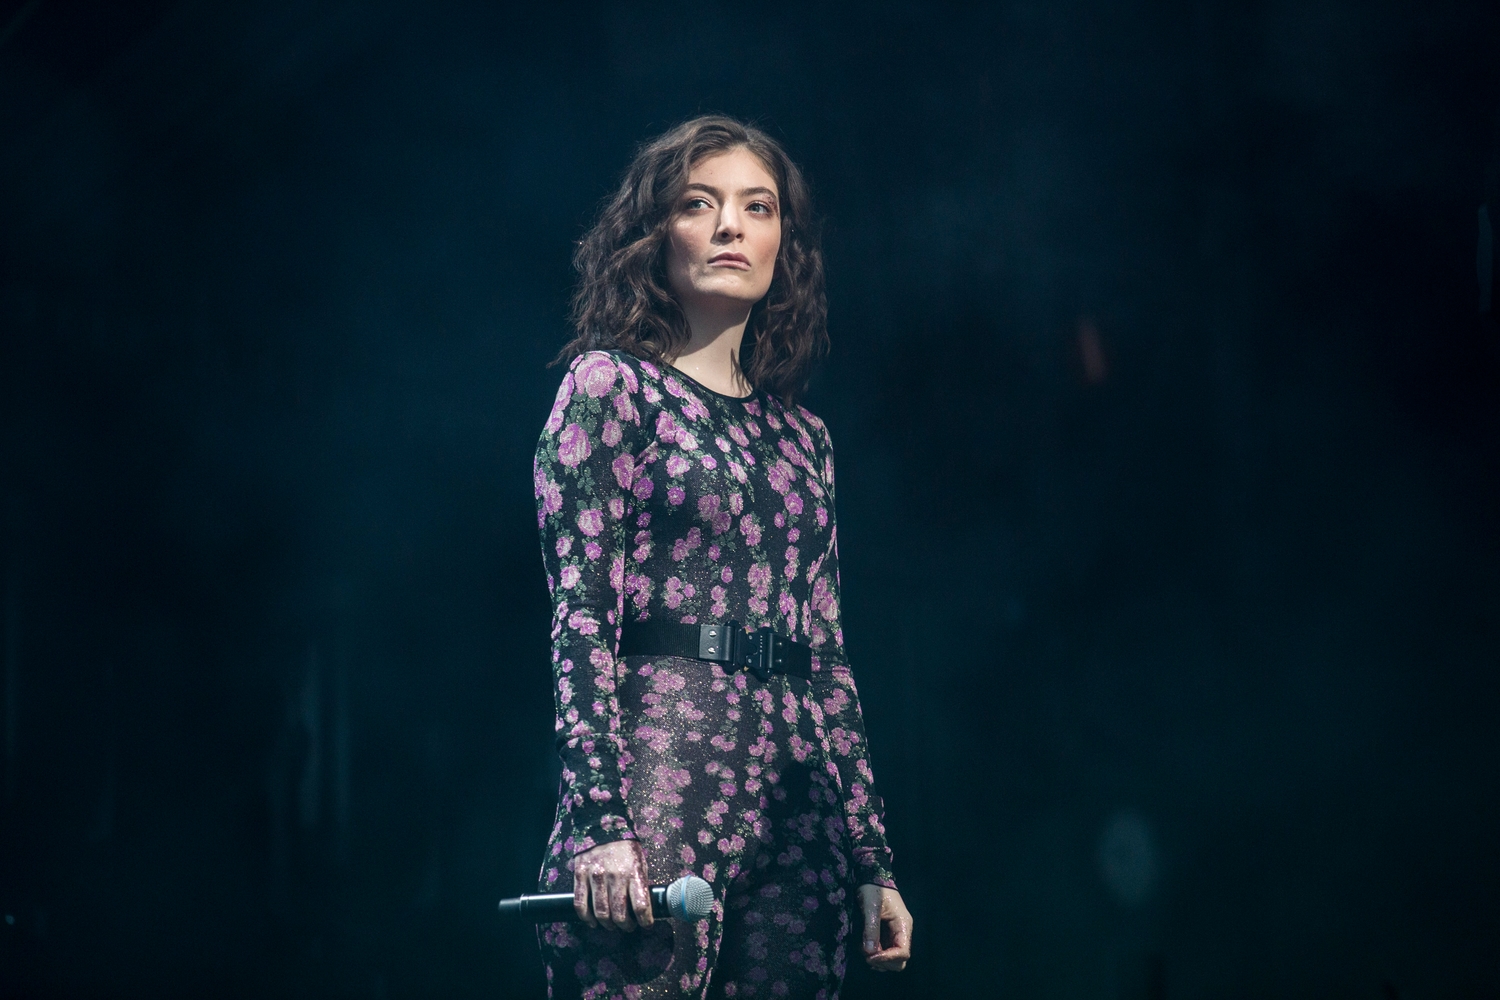 Watch Lorde cover Kanye West in Chicago